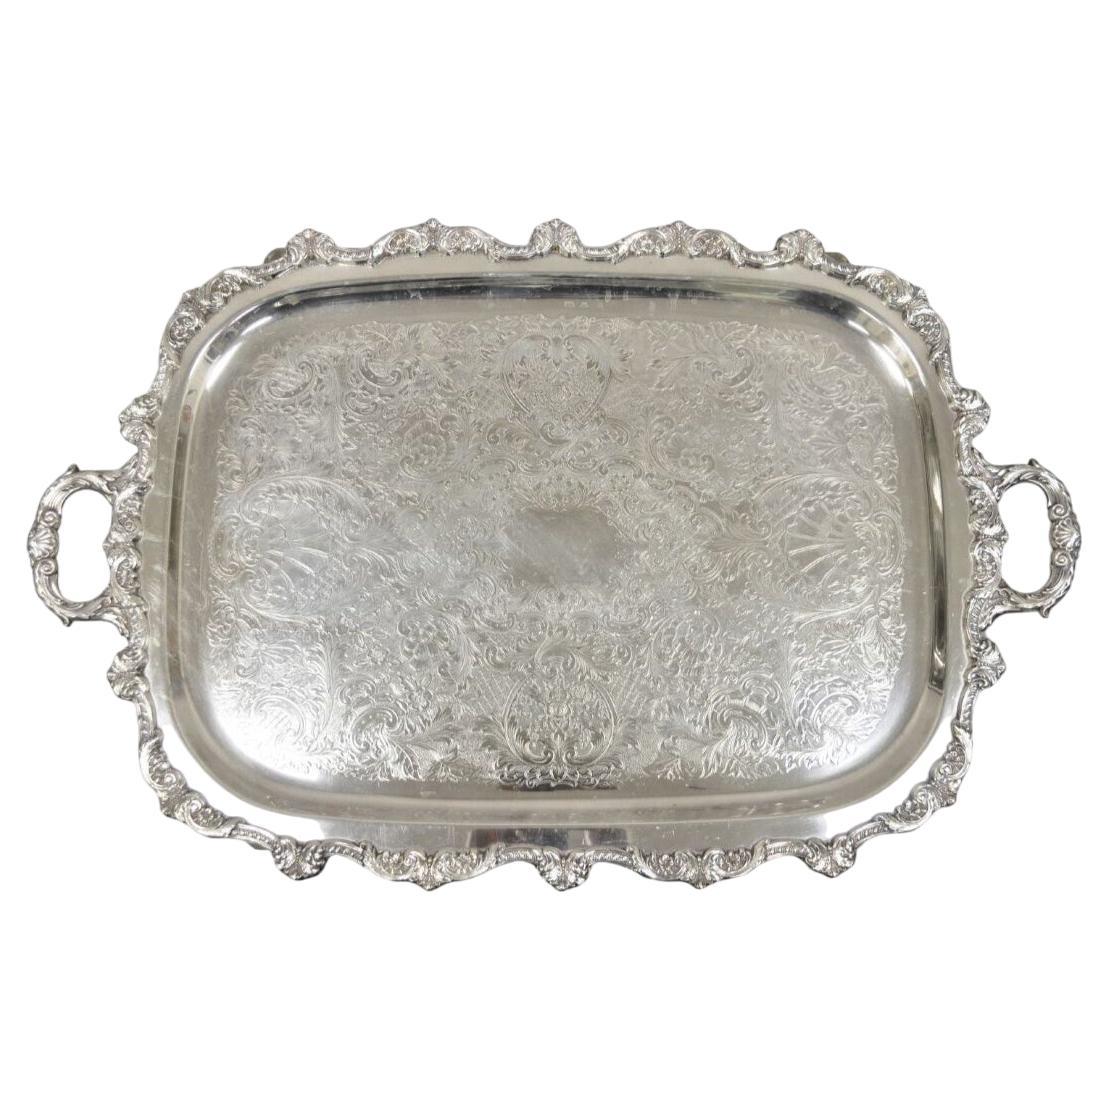 Vintage EPCA Old English by Poole 5032 Silver Plated Ornate Serving Platter Tray For Sale